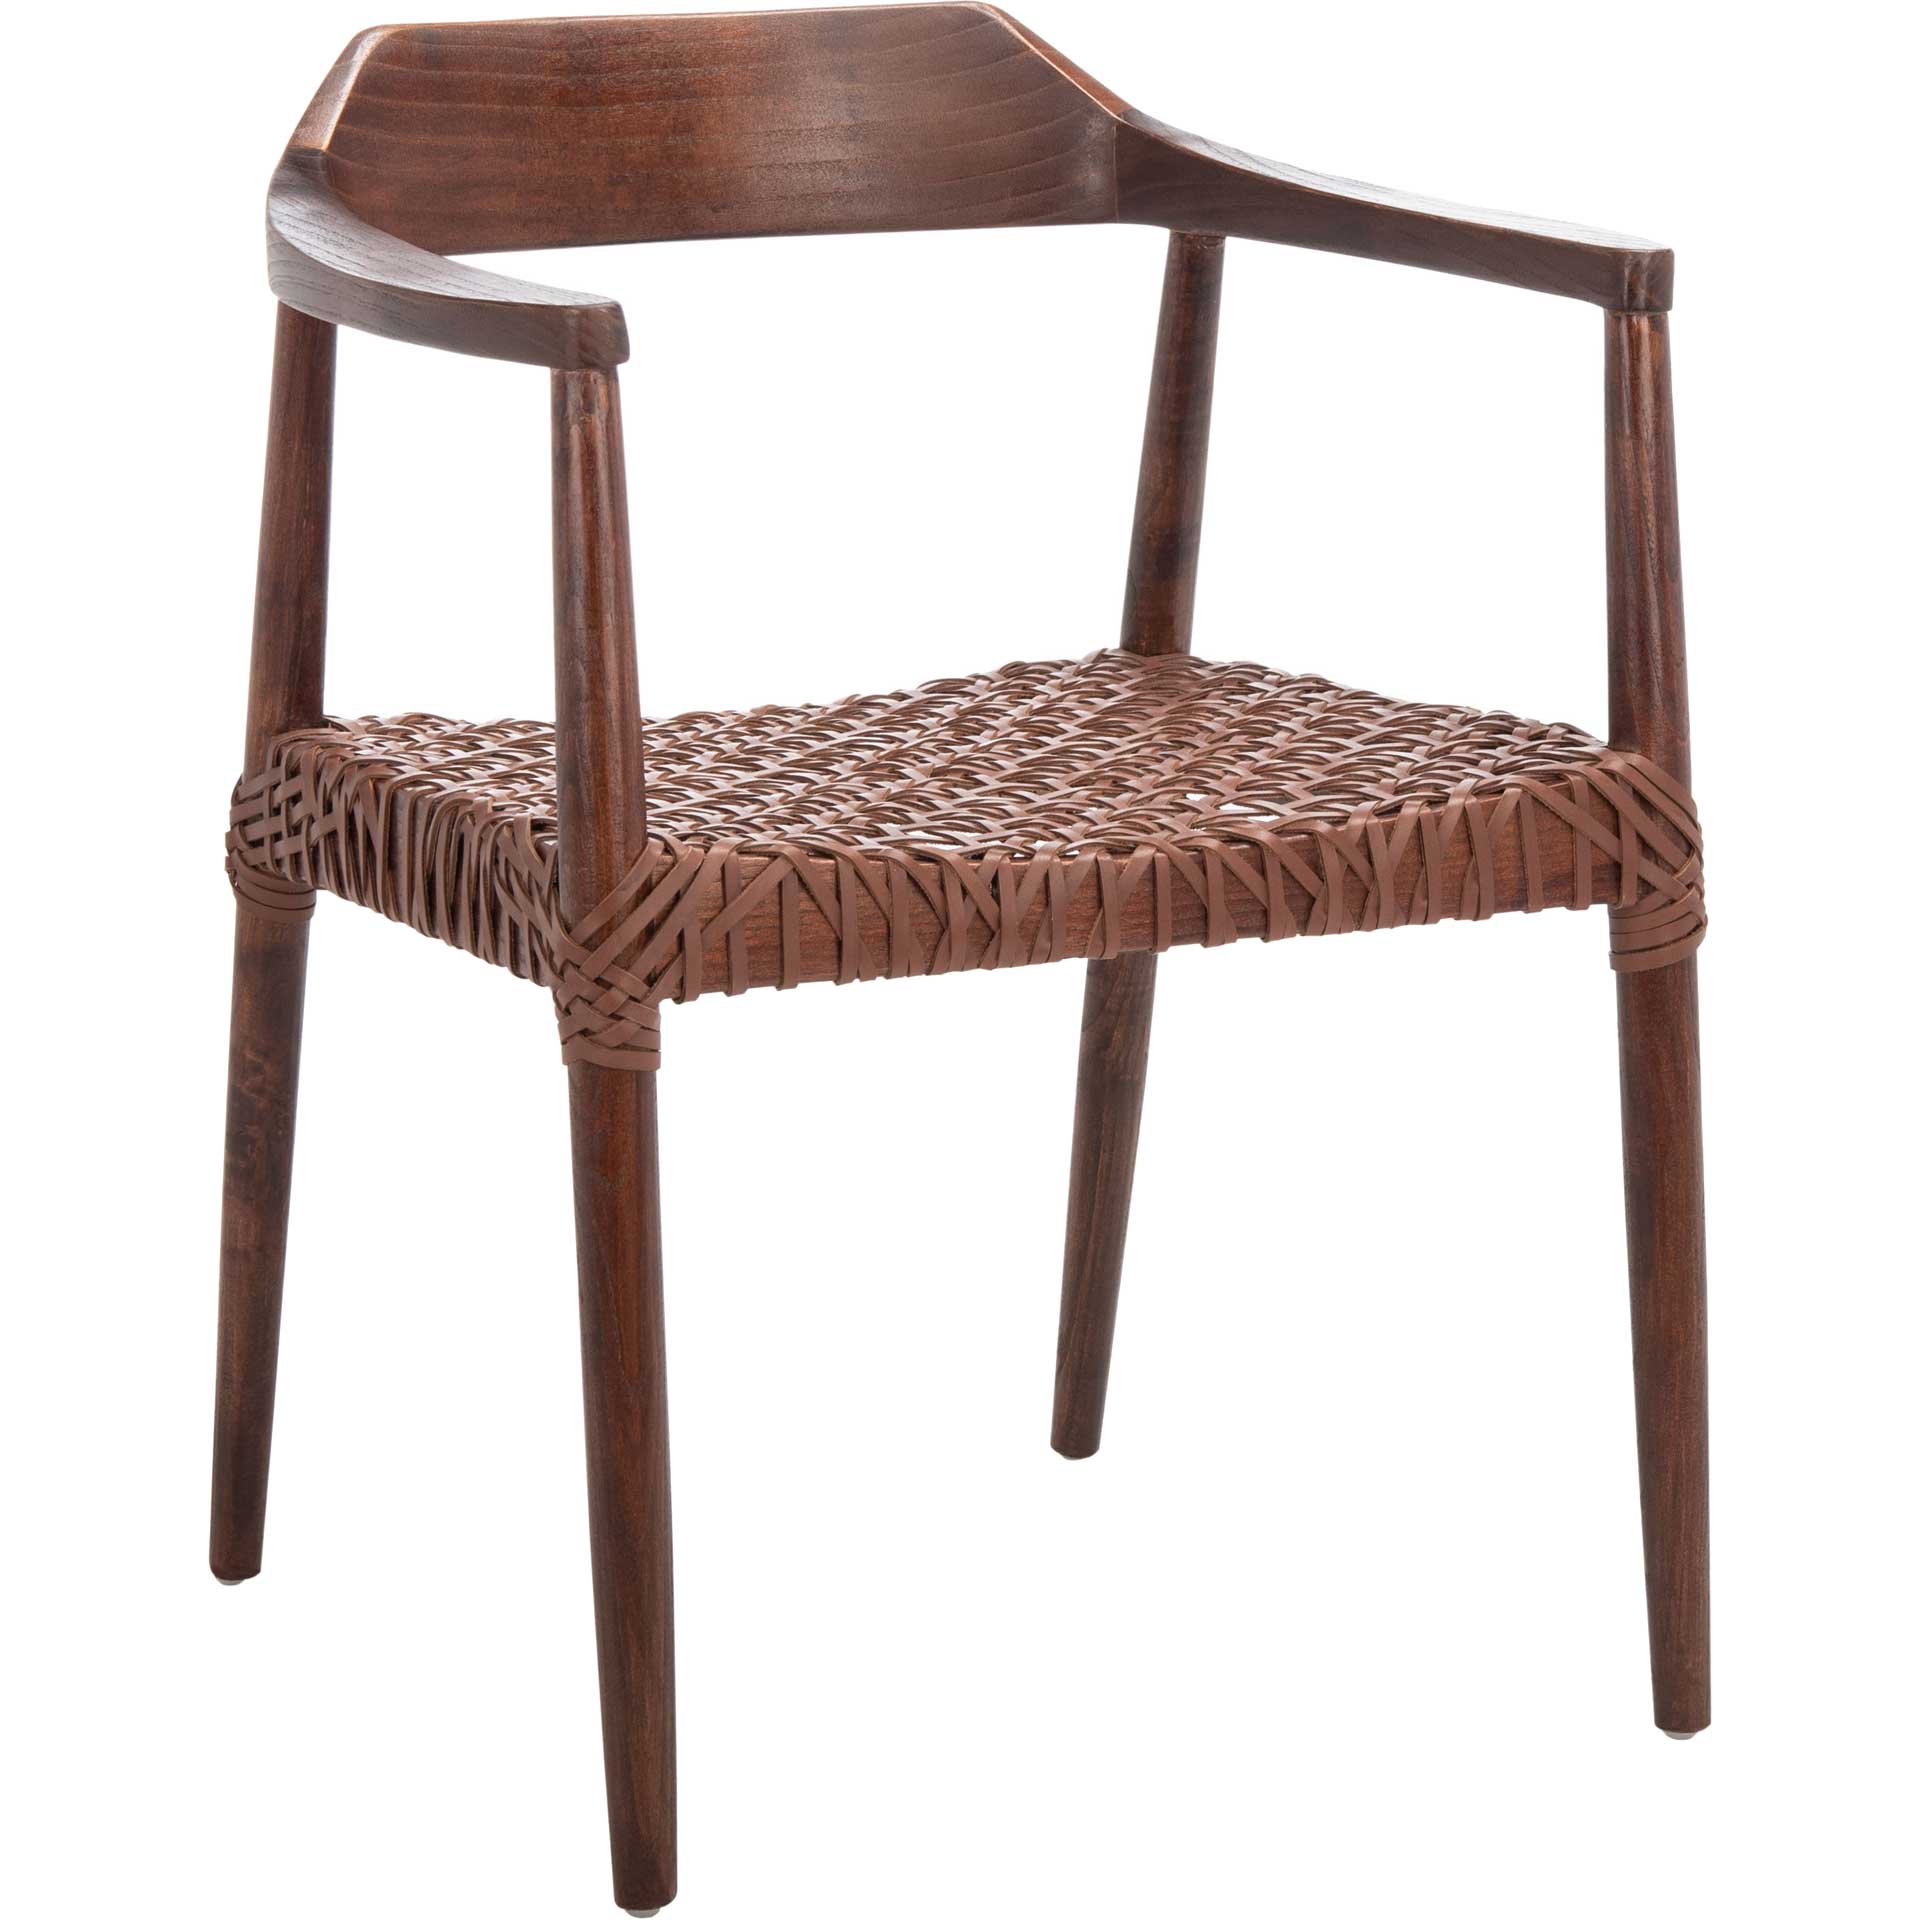 Murray Leather Woven Accent Chair Walnut/Cognac